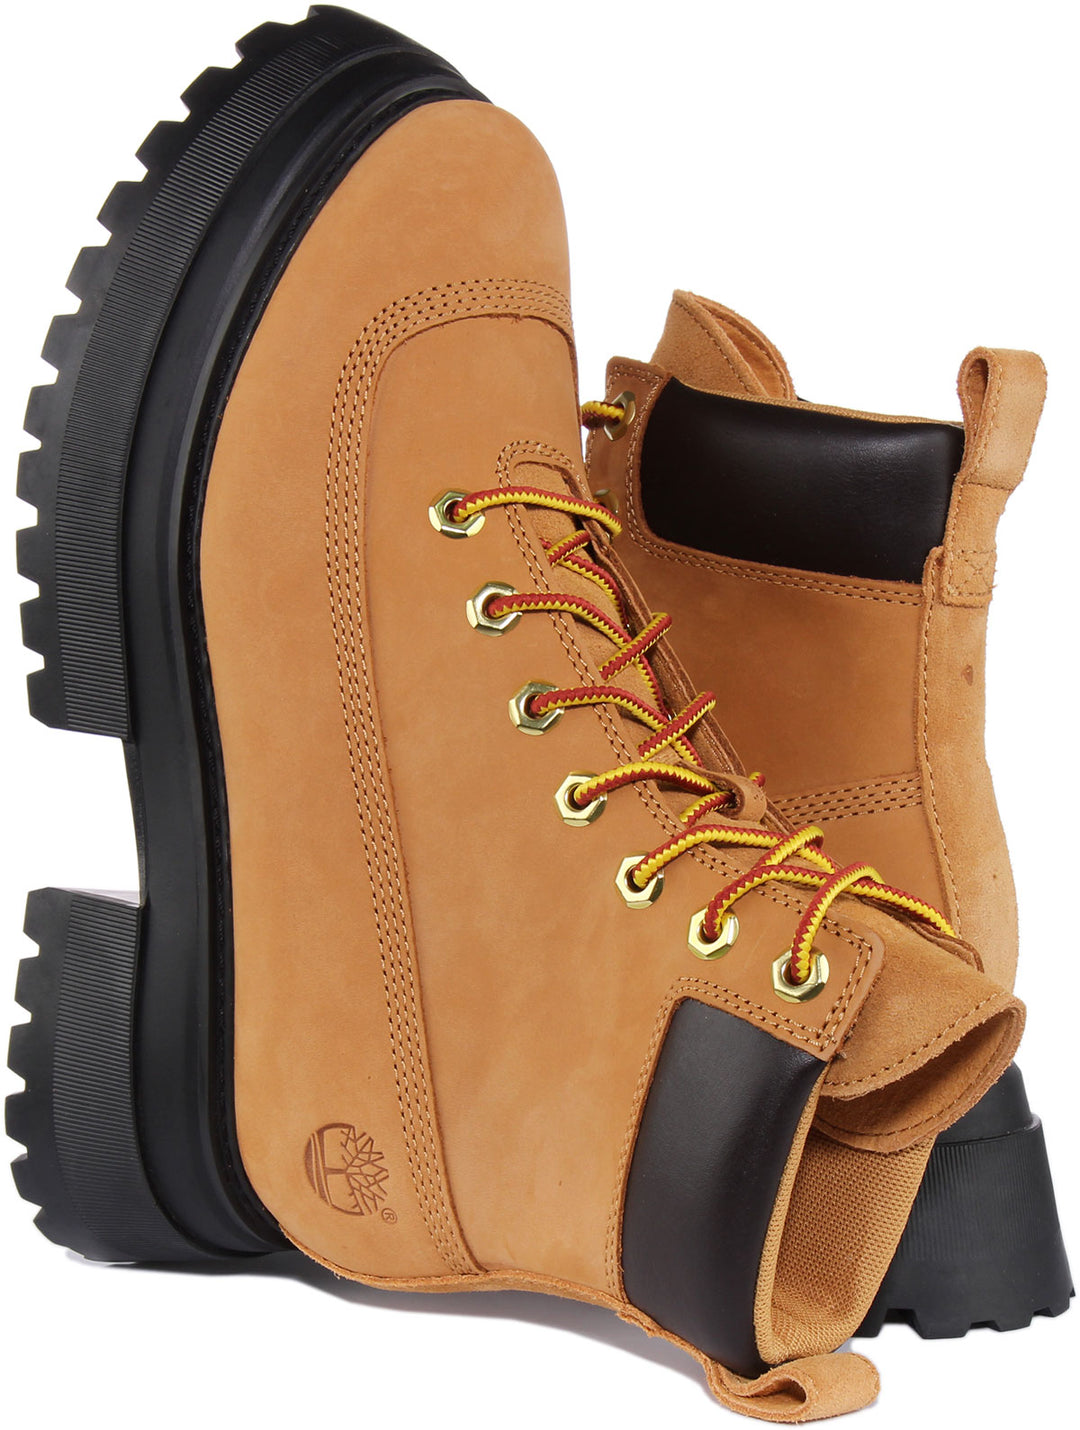 Timberland Sky A2Kmu In Wheat For Women